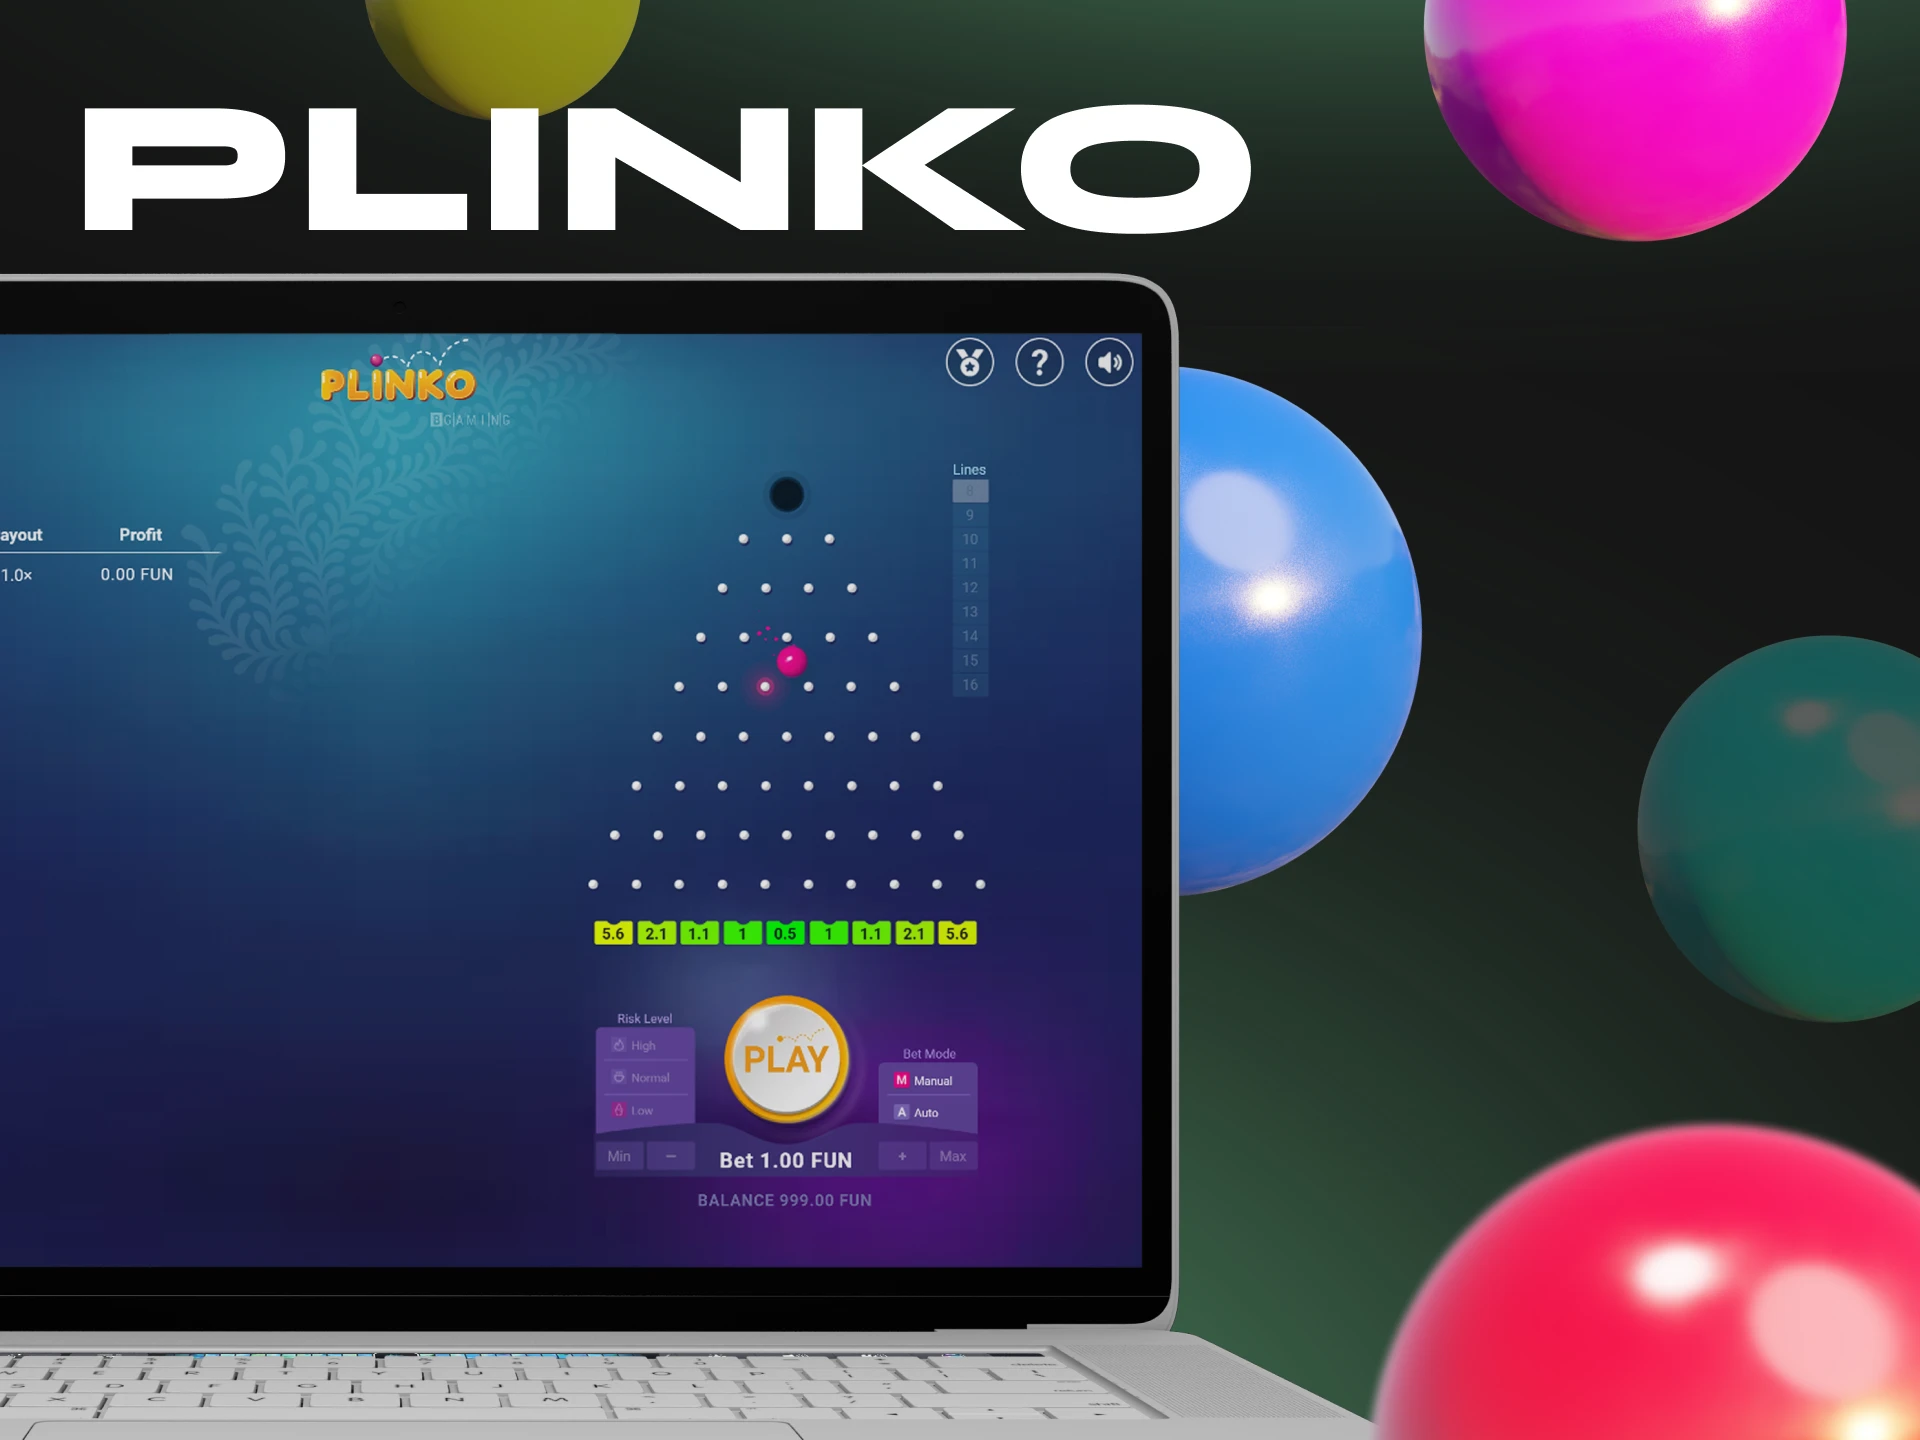 Increase your chances of winning with the Plinko game.